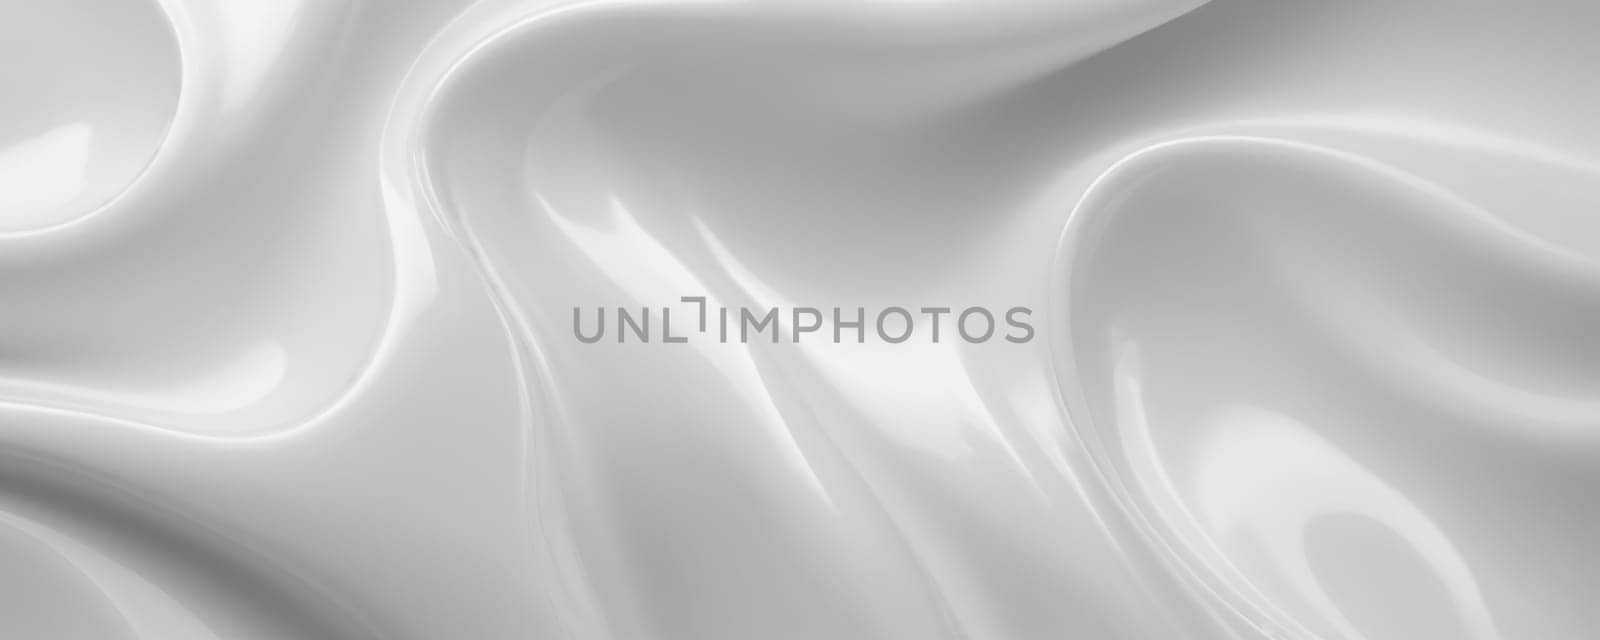 Abstract Pattern of Liquid or Silk in Shades of White and Grey by nkotlyar